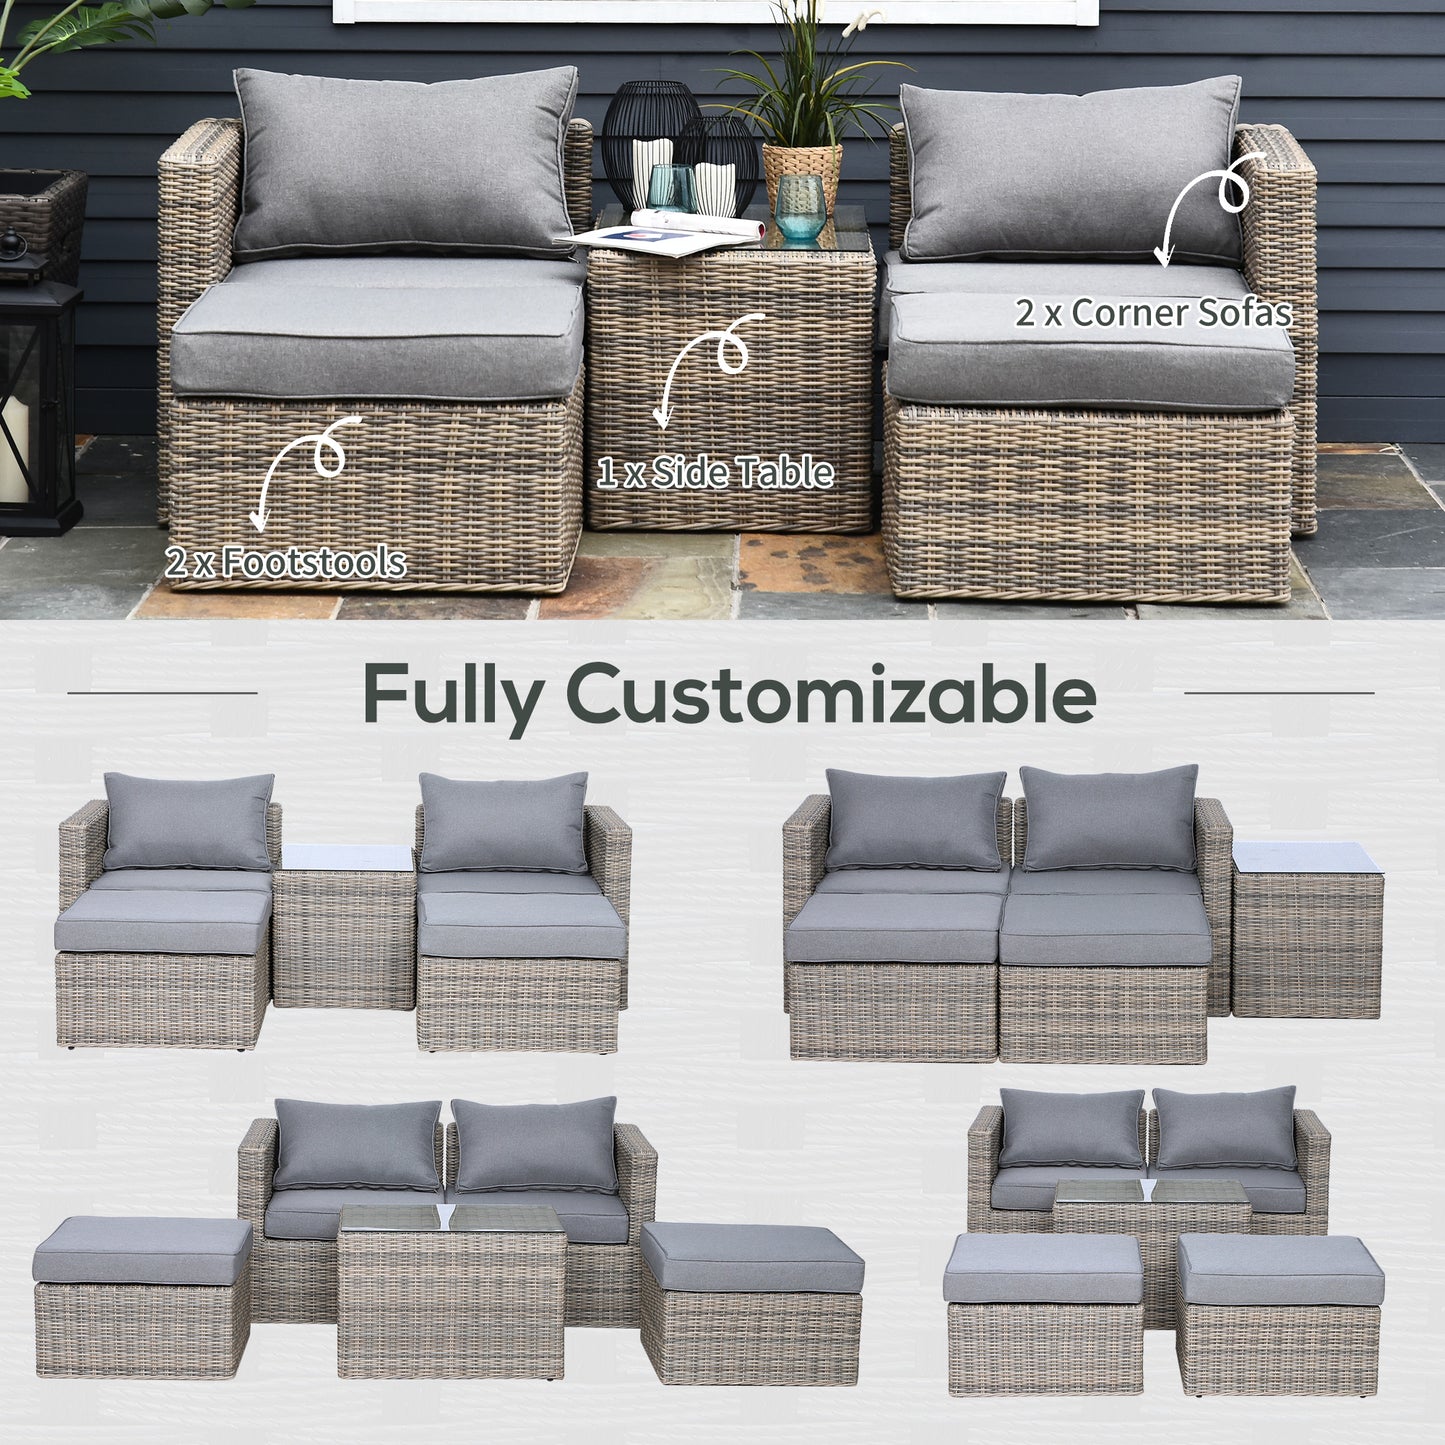 Outsunny 2 Seater Rattan Garden Furniture Set w/ Tall Glass-Top Table Aluminium Frame Plastic Wicker Thick Soft Cushions Outdoor Balcony Sofa, Grey